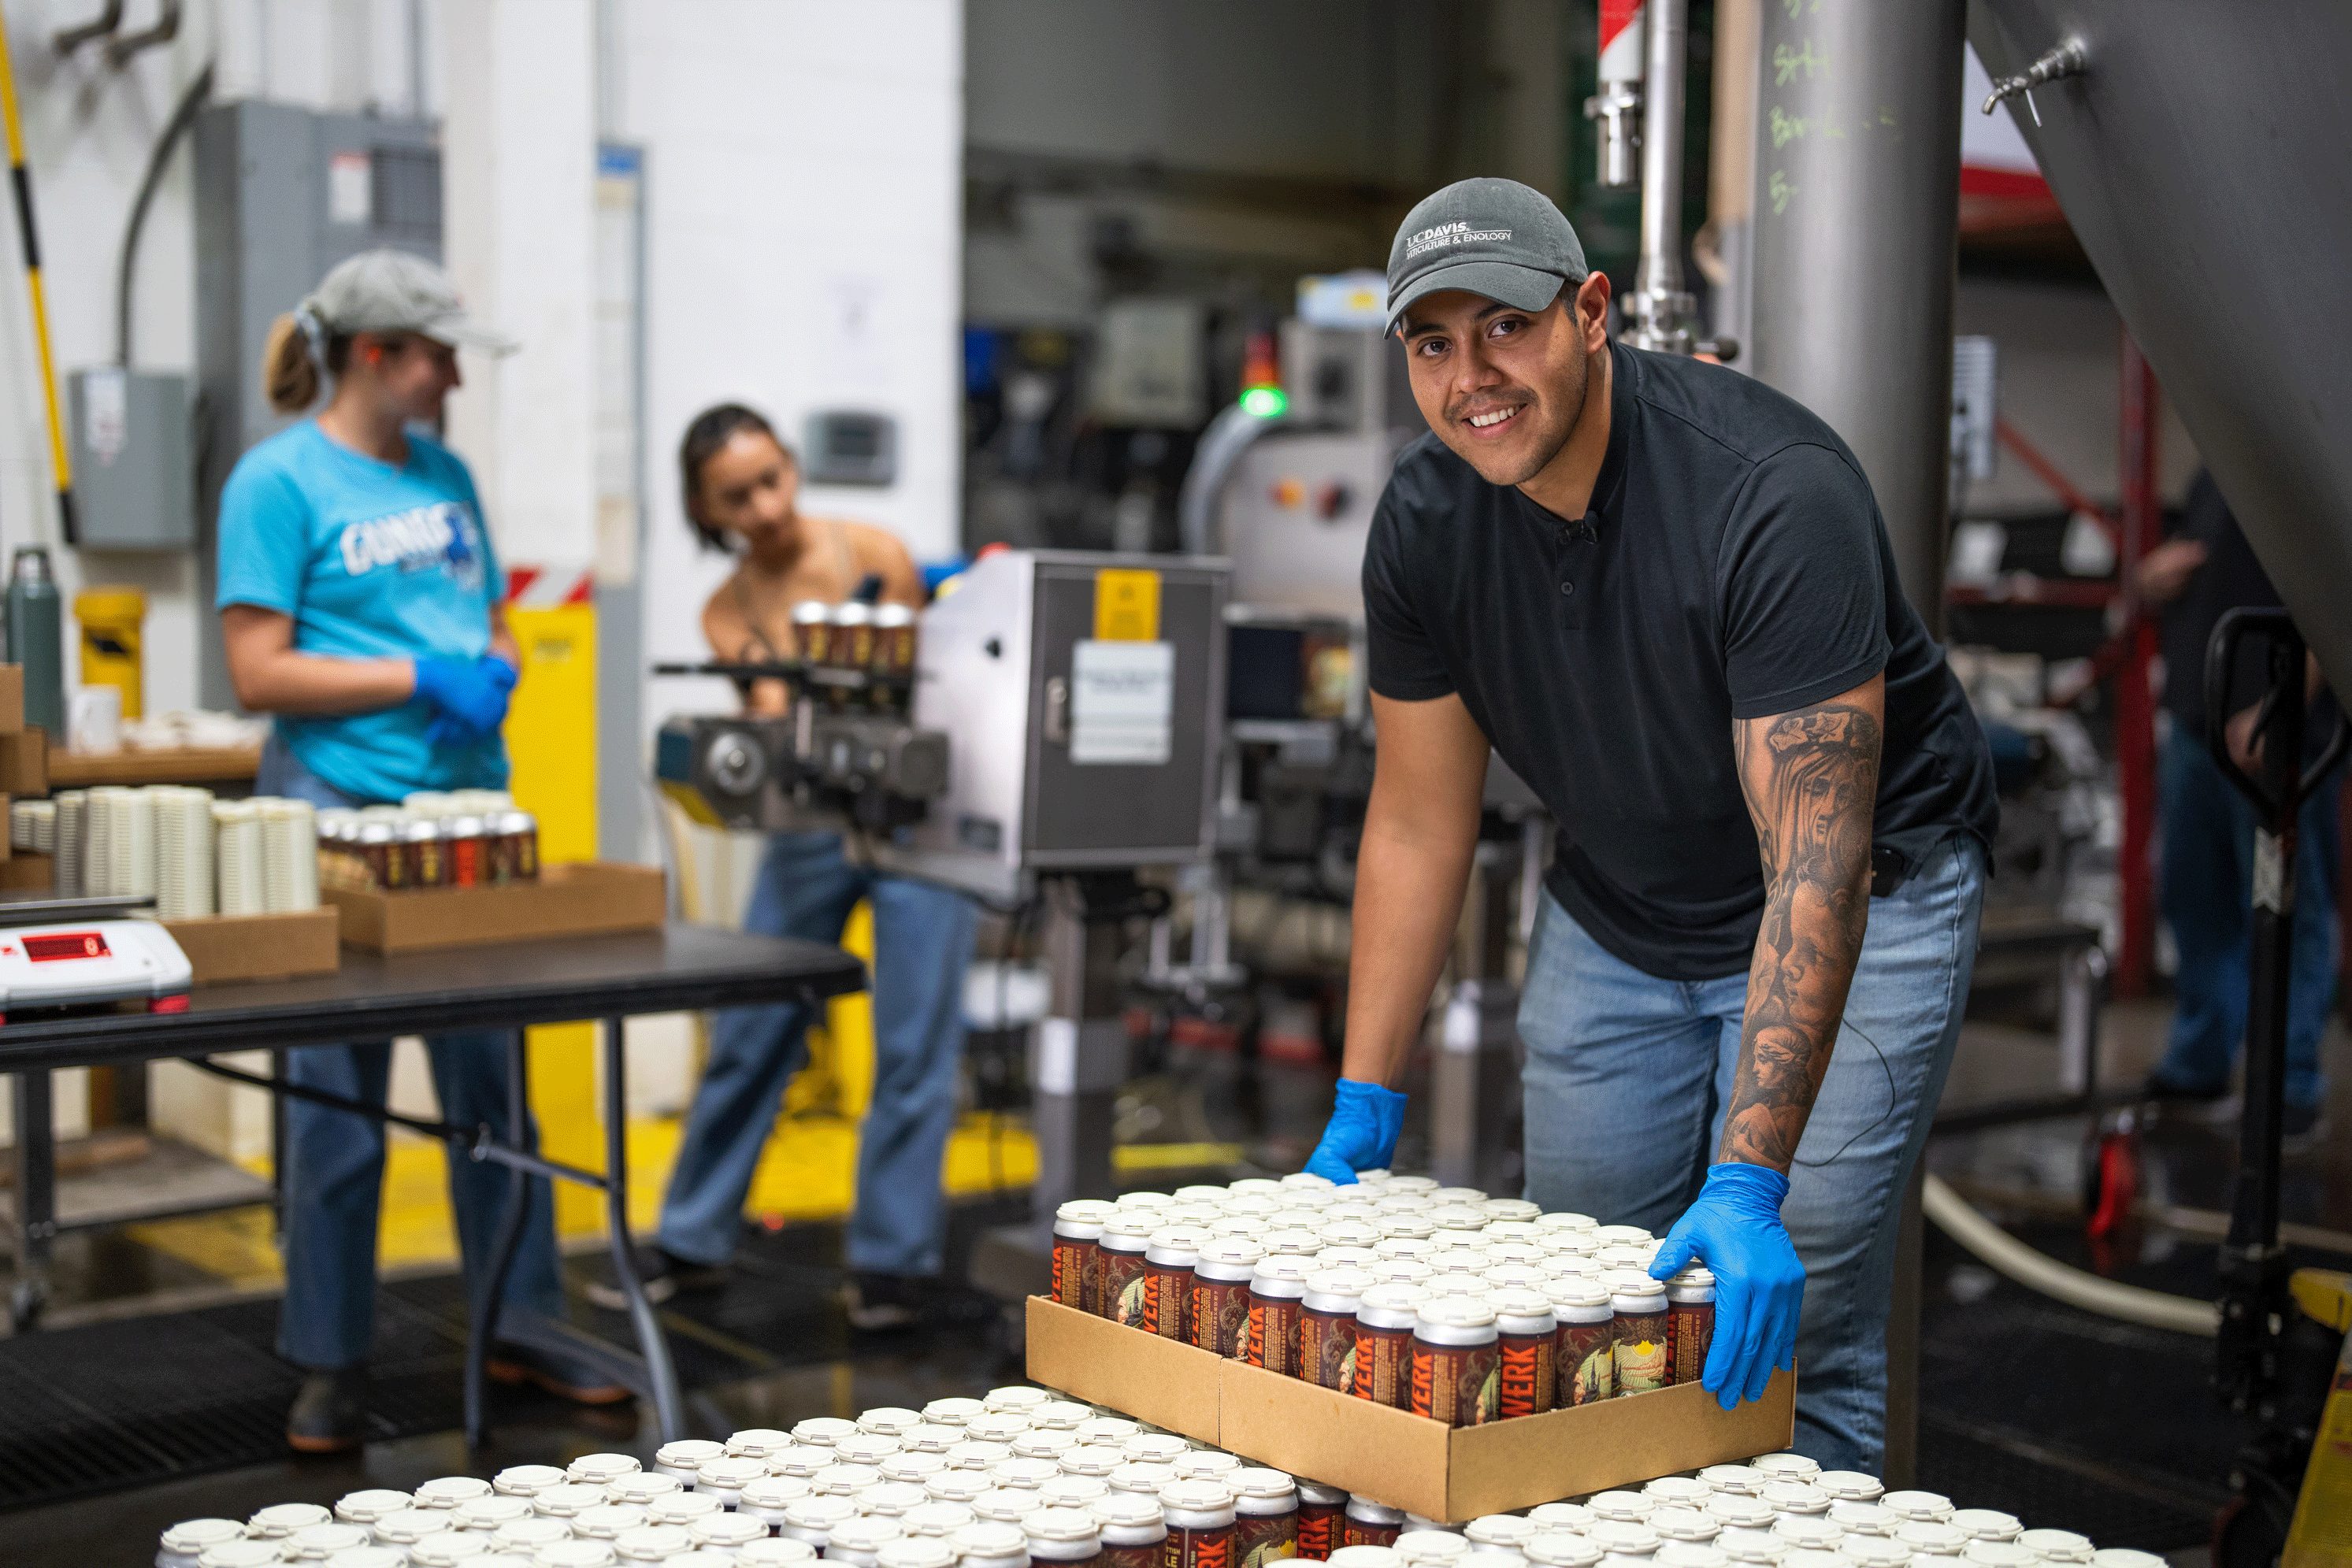 Moises Gomez, winner of the 2022 IronBrew competition, works with his team to stack cans of their beer at the Sudwerk Brewery.